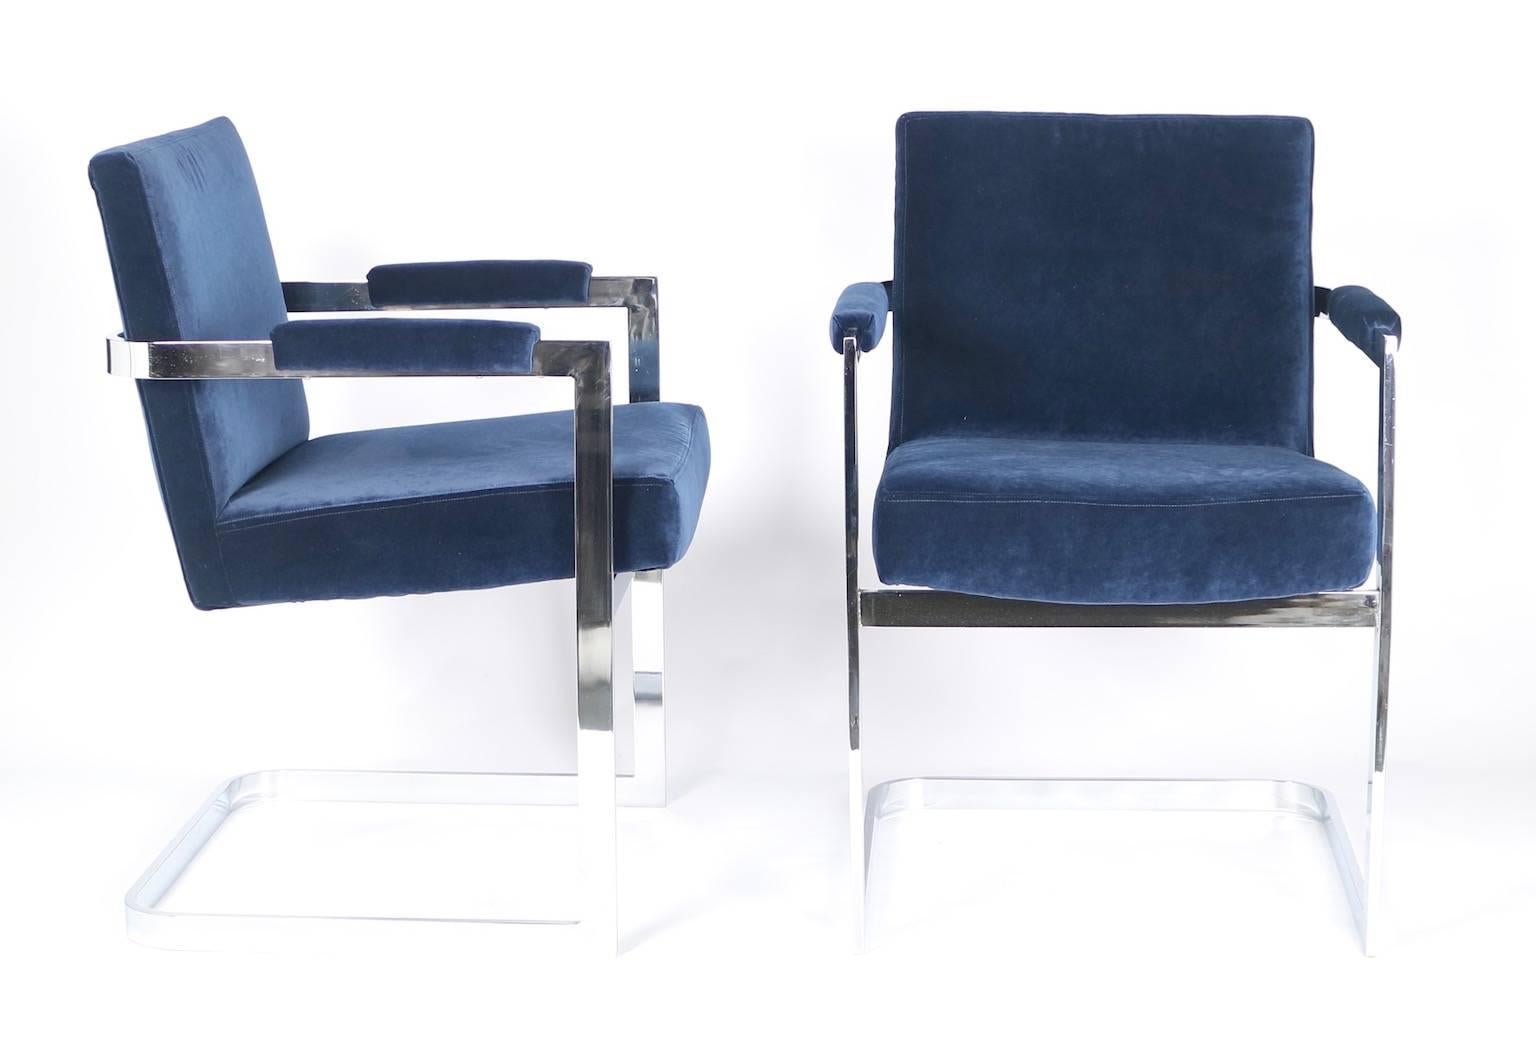 Mid-century modern Milo Baughman for Thayer Coggin armchairs in polished chrome and blue velvet. The velvet on these chairs looks new. These chairs are in very good vintage condition and have wear consistent with age and use.